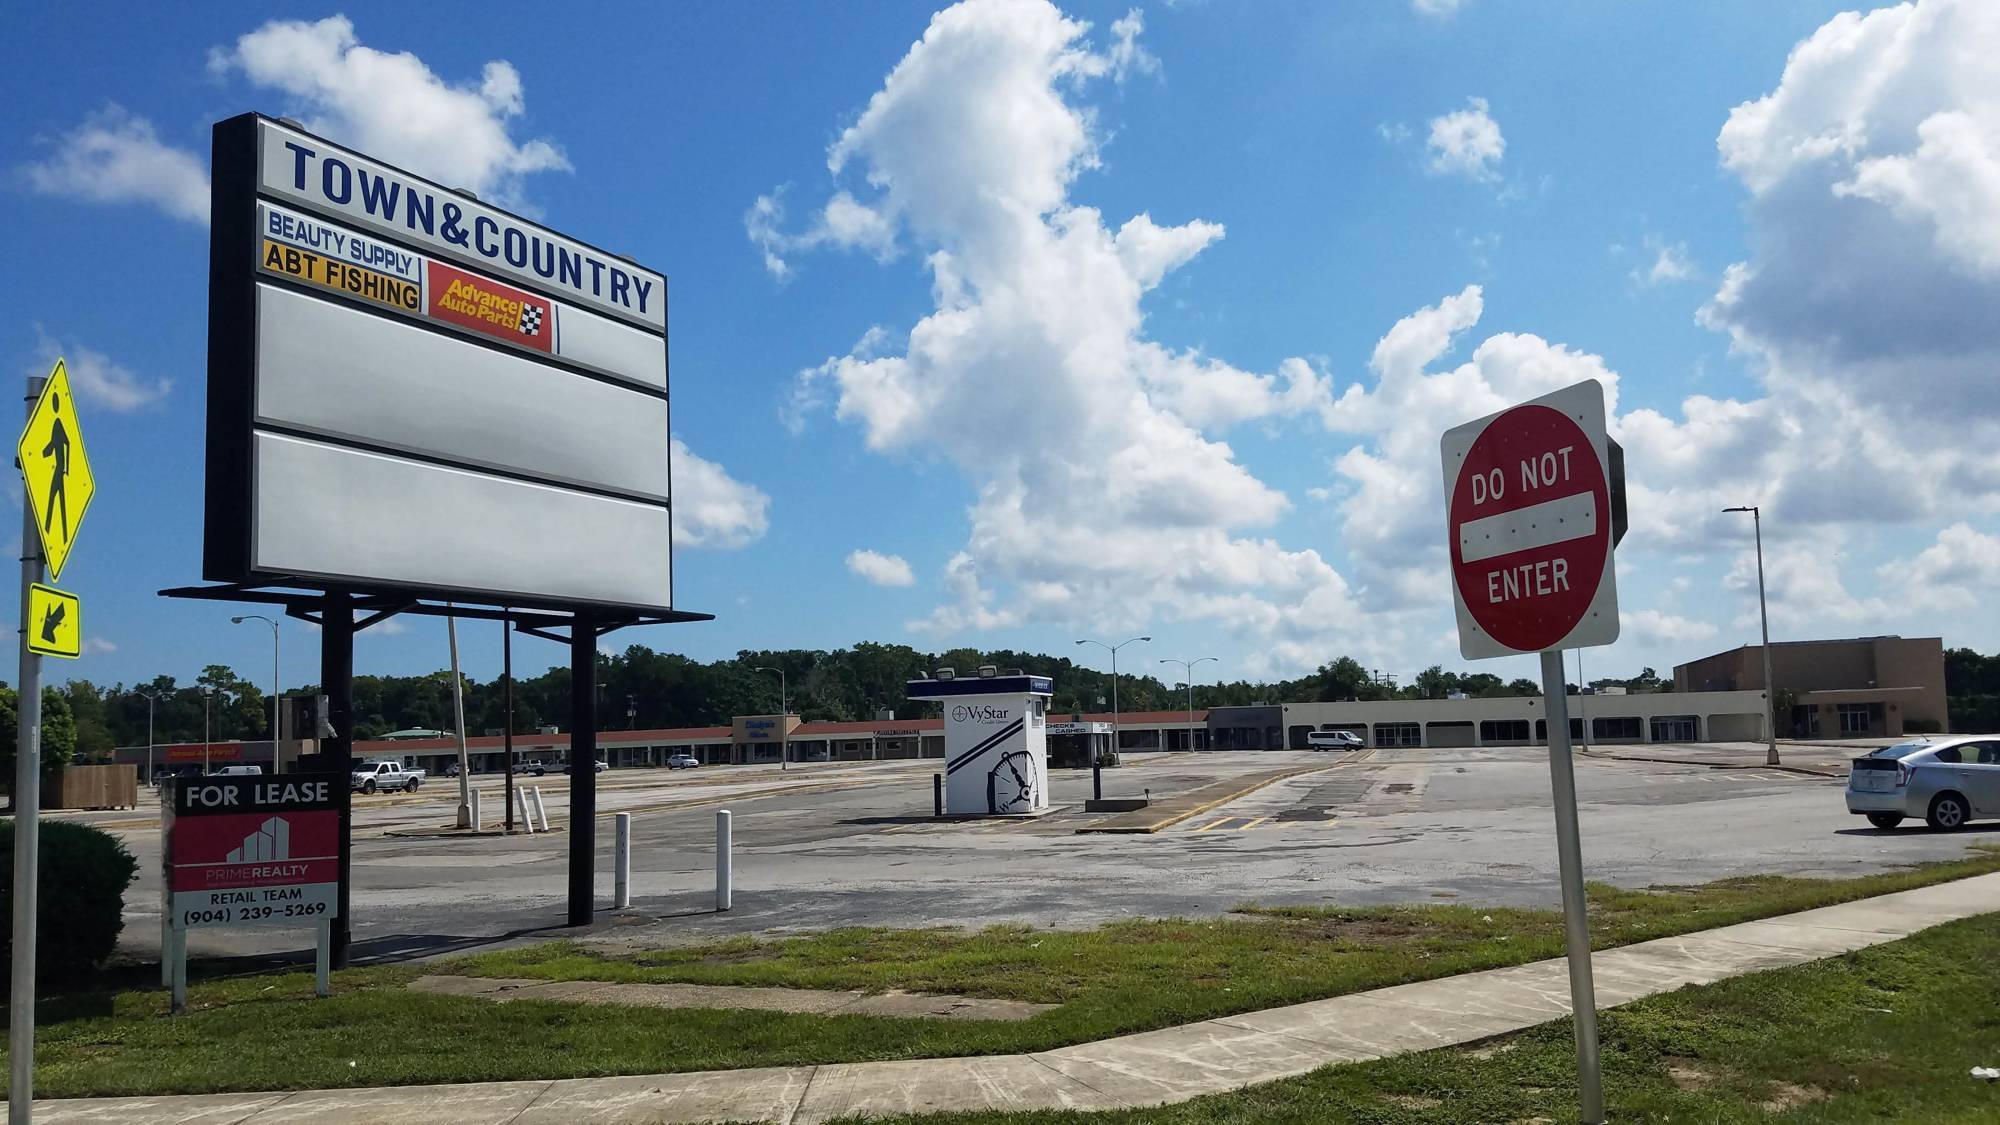 JWB Real Estate Capital is redeveloping the 69-year-old  Town & Country Shopping Center at northeast University Boulevard and Arlington Expressway.